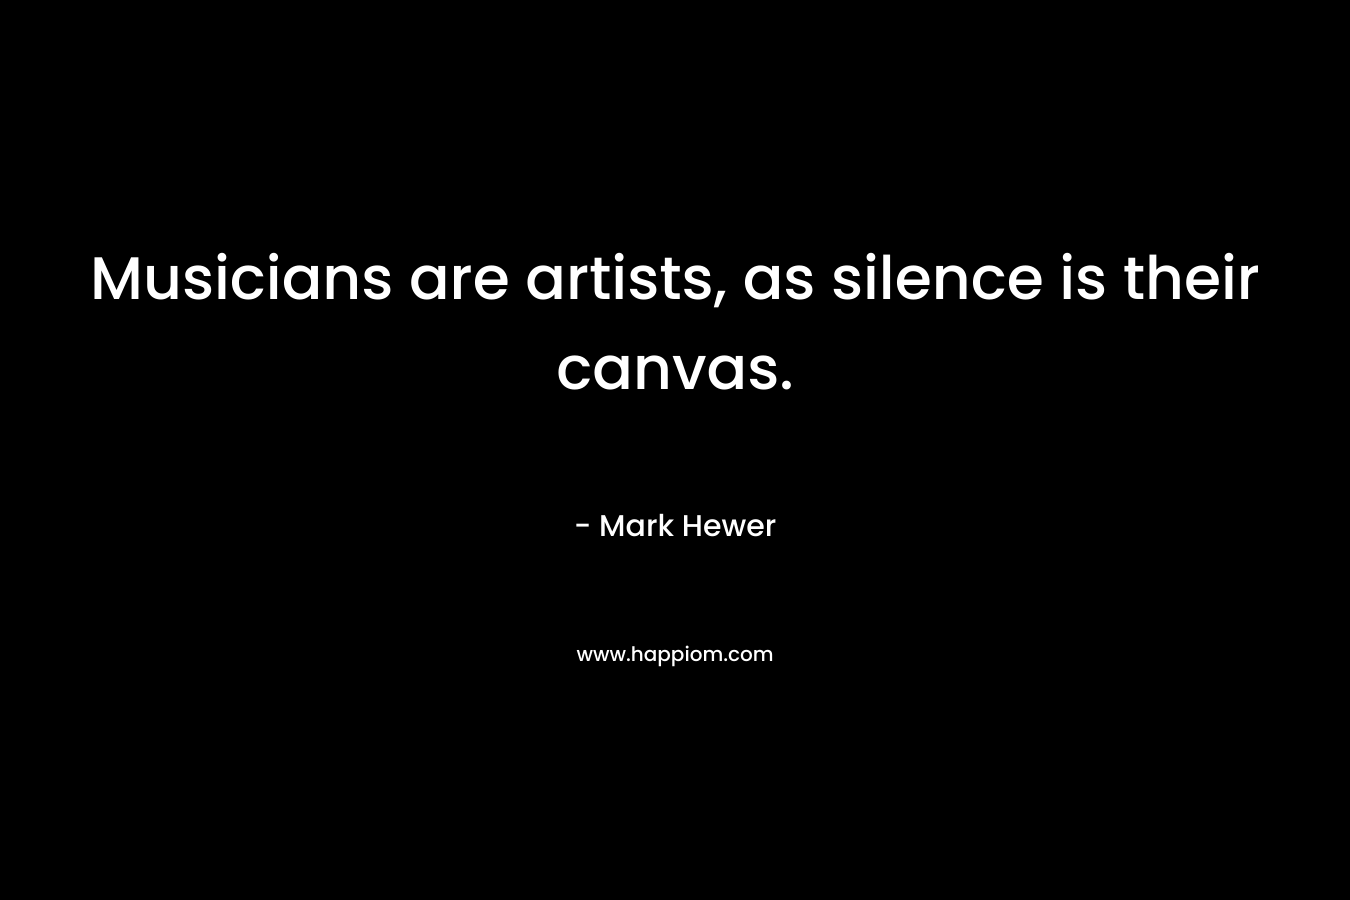 Musicians are artists, as silence is their canvas. – Mark Hewer